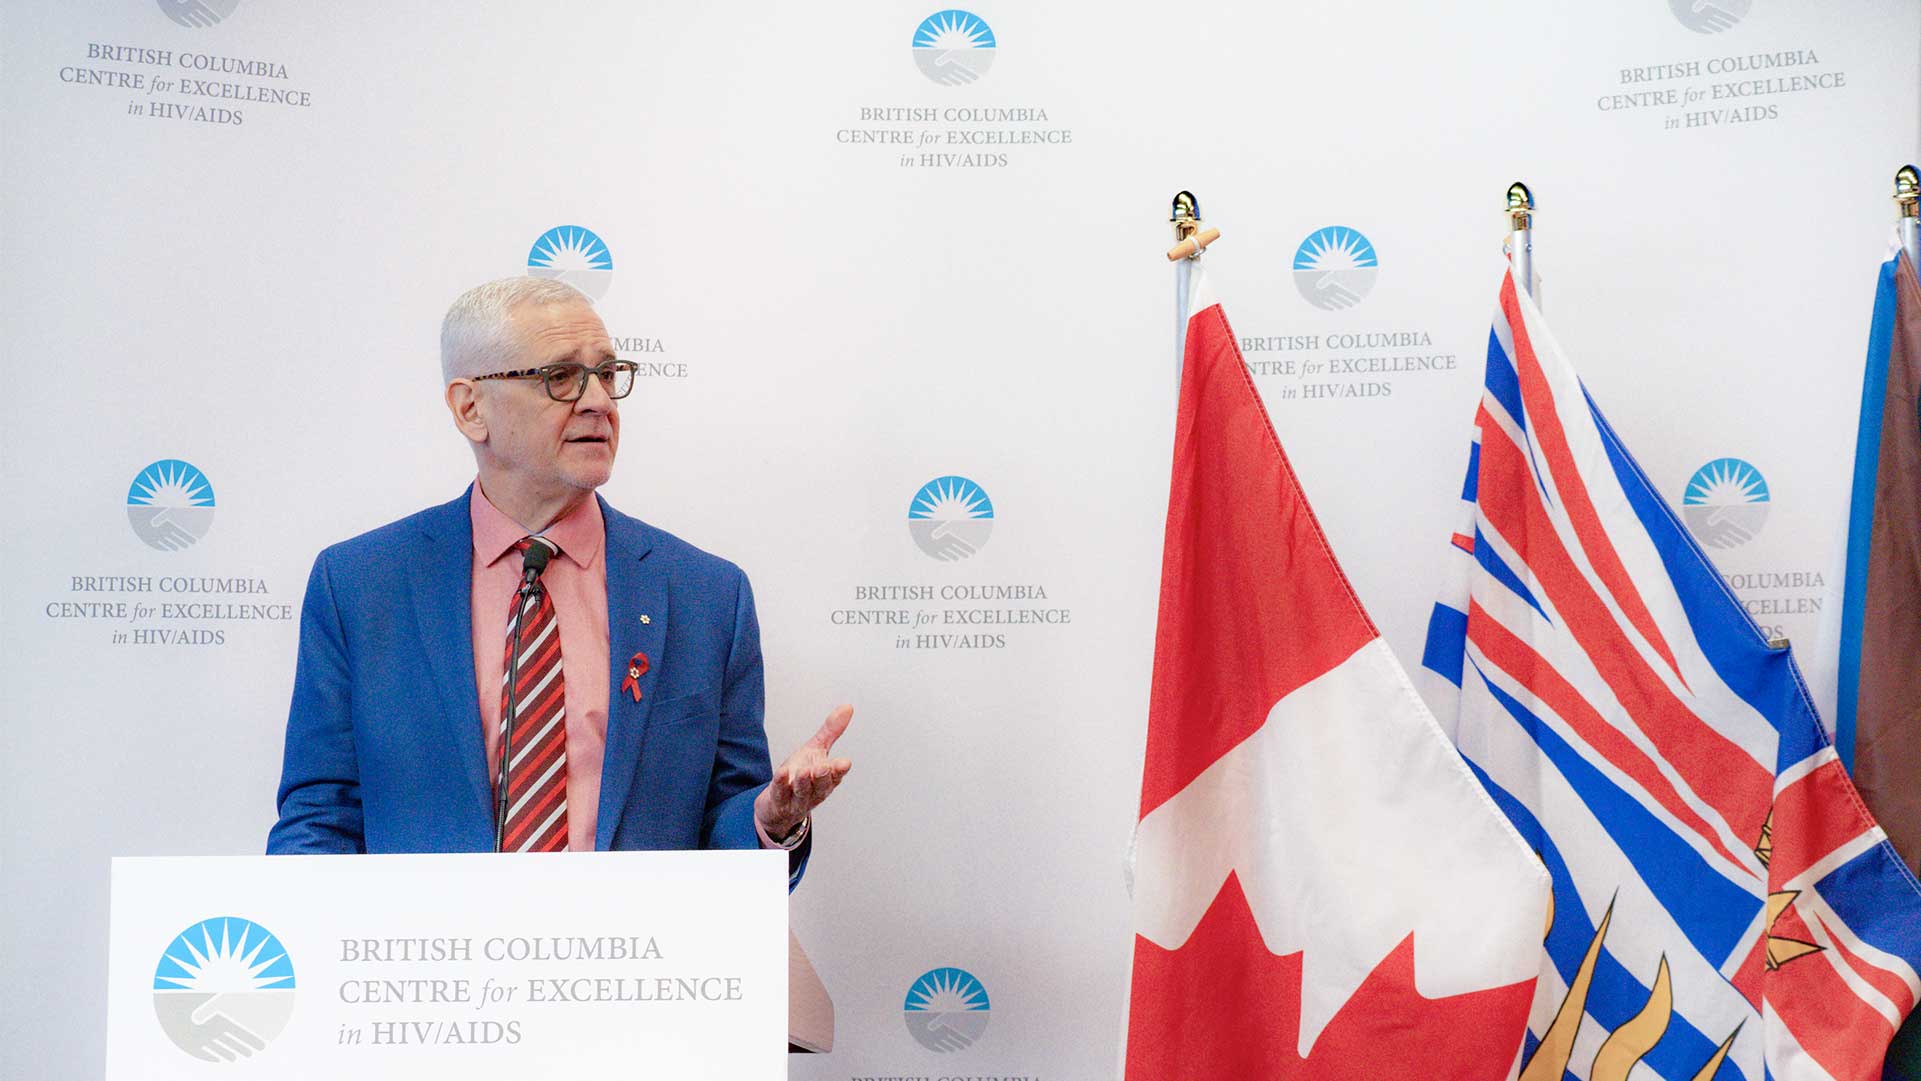 https://bccfe.ca/sites/default/files/revslider/image/BC-Centre-for-Excellence-in-HIV-AIDS-launches-new-initiative-targeting-sexually-transmitted-infections-in-BC.jpg